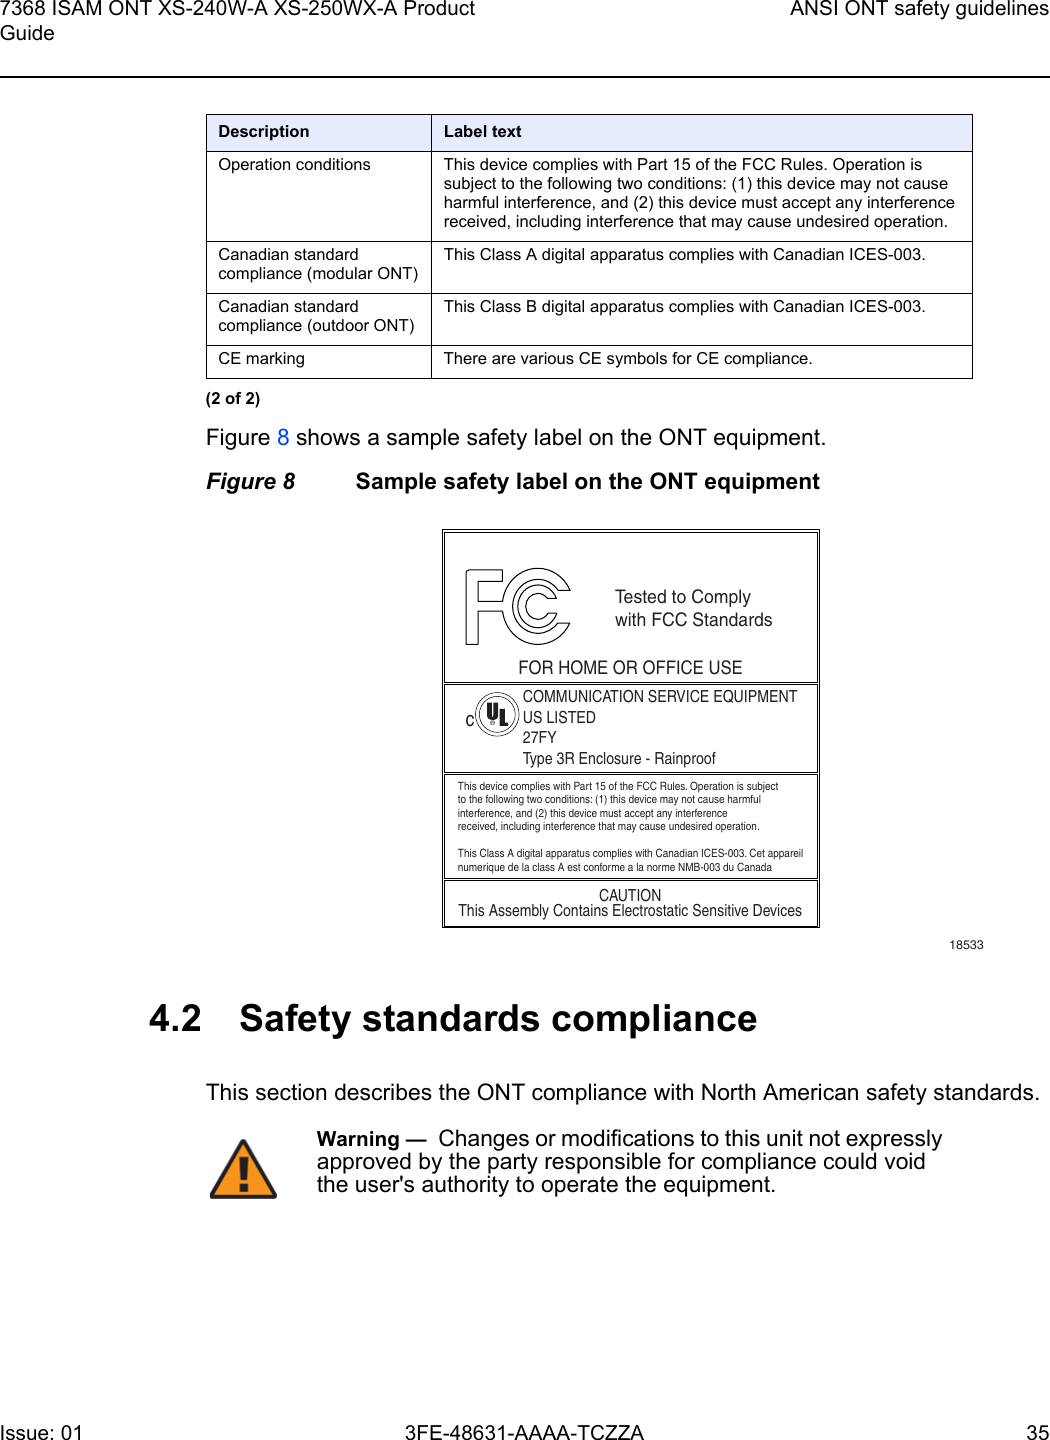 7368 ISAM ONT XS-240W-A XS-250WX-A Product GuideANSI ONT safety guidelinesIssue: 01 3FE-48631-AAAA-TCZZA 35 Figure 8 shows a sample safety label on the ONT equipment.Figure 8 Sample safety label on the ONT equipment4.2 Safety standards complianceThis section describes the ONT compliance with North American safety standards.Operation conditions This device complies with Part 15 of the FCC Rules. Operation is subject to the following two conditions: (1) this device may not cause harmful interference, and (2) this device must accept any interference received, including interference that may cause undesired operation.Canadian standard compliance (modular ONT)This Class A digital apparatus complies with Canadian ICES-003. Canadian standard compliance (outdoor ONT)This Class B digital apparatus complies with Canadian ICES-003. CE marking There are various CE symbols for CE compliance.Description Label text(2 of 2)18533This device complies with Part 15 of the FCC Rules. Operation is subjectto the following two conditions: (1) this device may not cause harmfulinterference, and (2) this device must accept any interferencereceived, including interference that may cause undesired operation.This Class A digital apparatus complies with Canadian ICES-003. Cet appareilnumerique de la class A est conforme a la norme NMB-003 du CanadaTested to Complywith FCC StandardsFOR HOME OR OFFICE USECOMMUNICATION SERVICE EQUIPMENTUS LISTED27FYType 3R Enclosure - RainproofCAUTIONThis Assembly Contains Electrostatic Sensitive Devicesc®Warning —  Changes or modifications to this unit not expressly approved by the party responsible for compliance could void the user&apos;s authority to operate the equipment.